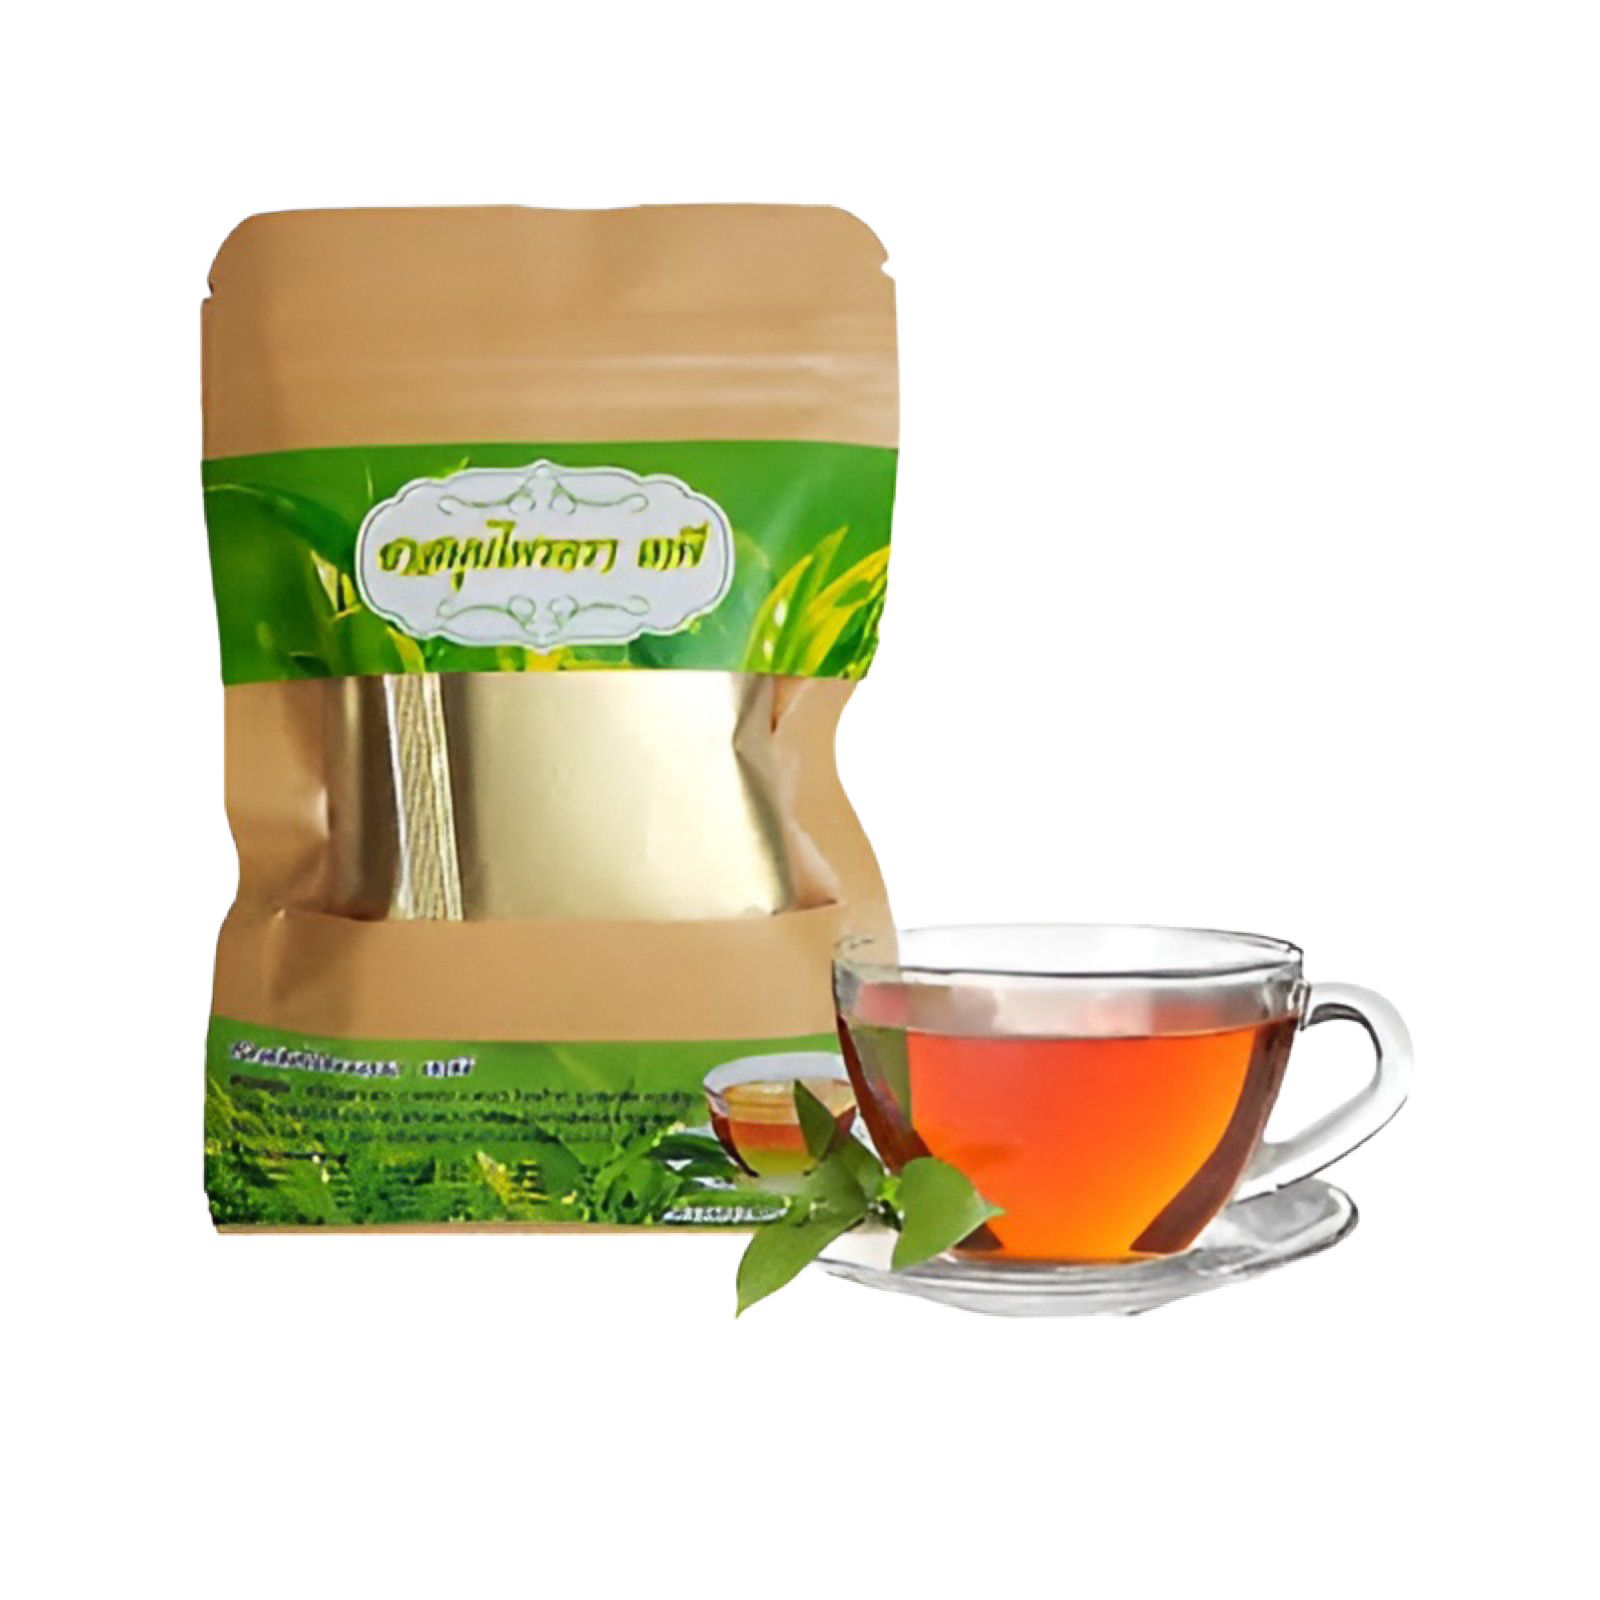 Tapee Tea The Original Herbal Pain Relief: FREE SHIPPING - ArtisanThai.com - Your Premier Crafts & Tapee Tea Supplier